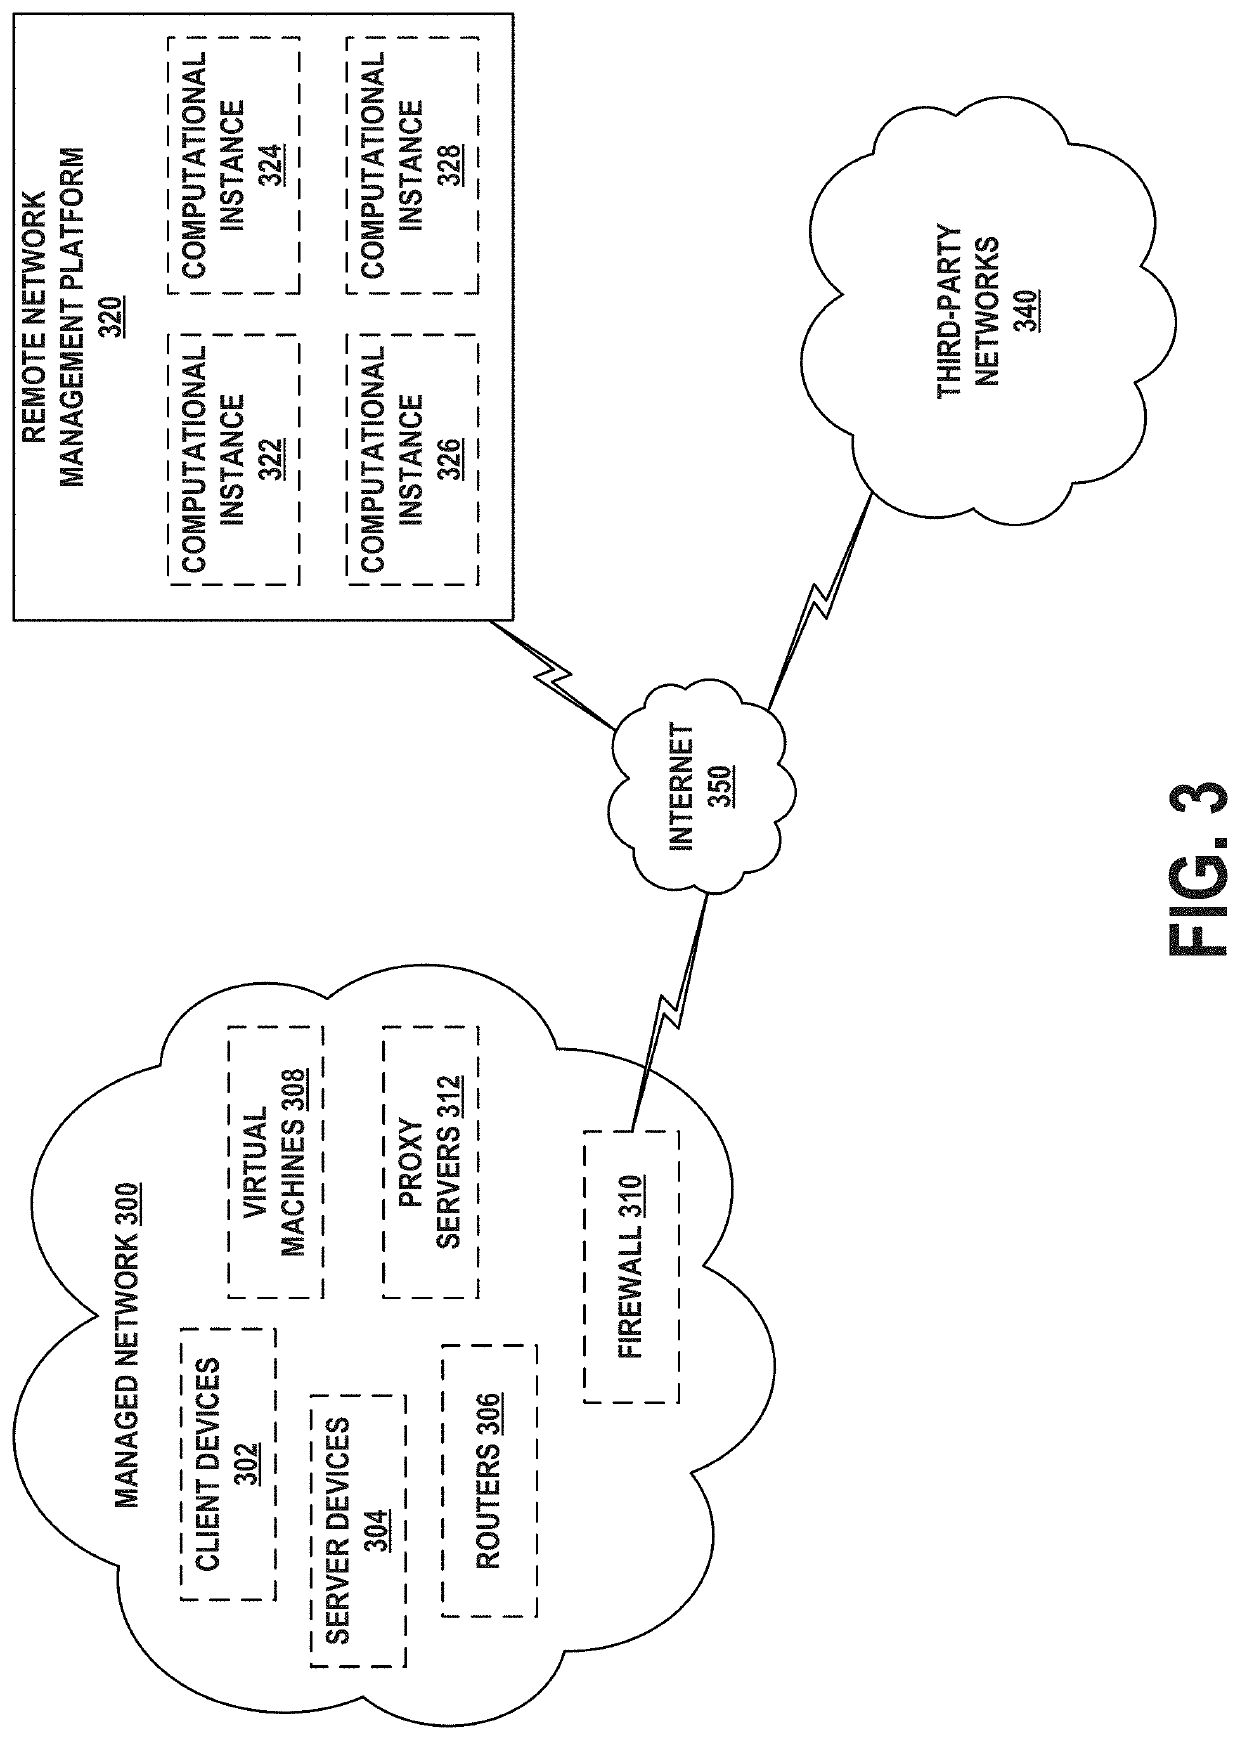 Personalized graphical user interfaces for enterprise-related actions